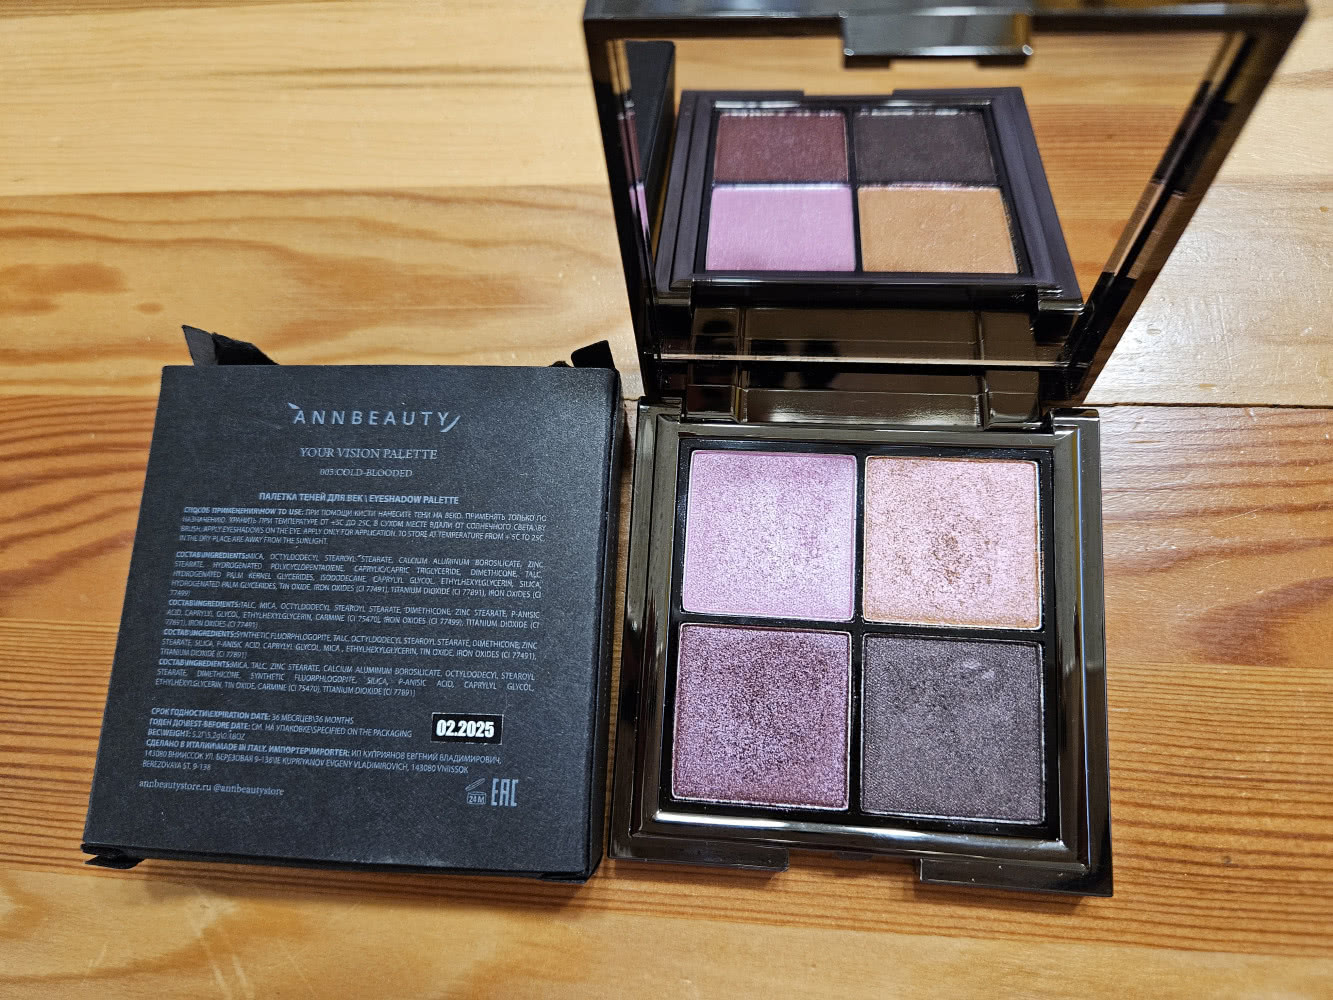 Annbeauty палетка YOUR VISION PALETTE COLD BLOODED б/у